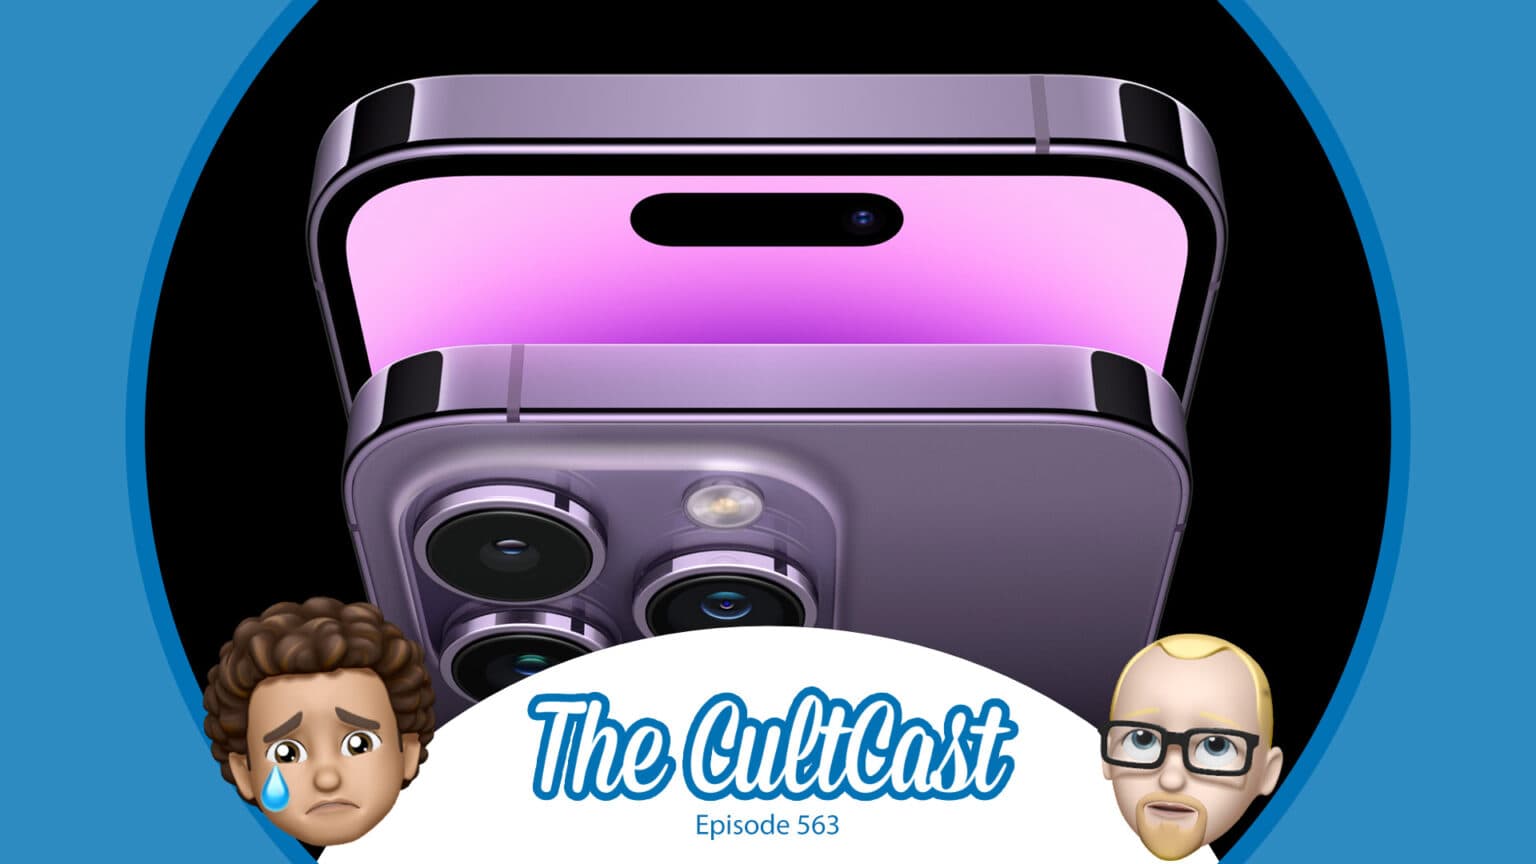 This week on The CultCast: Dynamic Island tips, Apple Watch Ultra ecstasy and more.